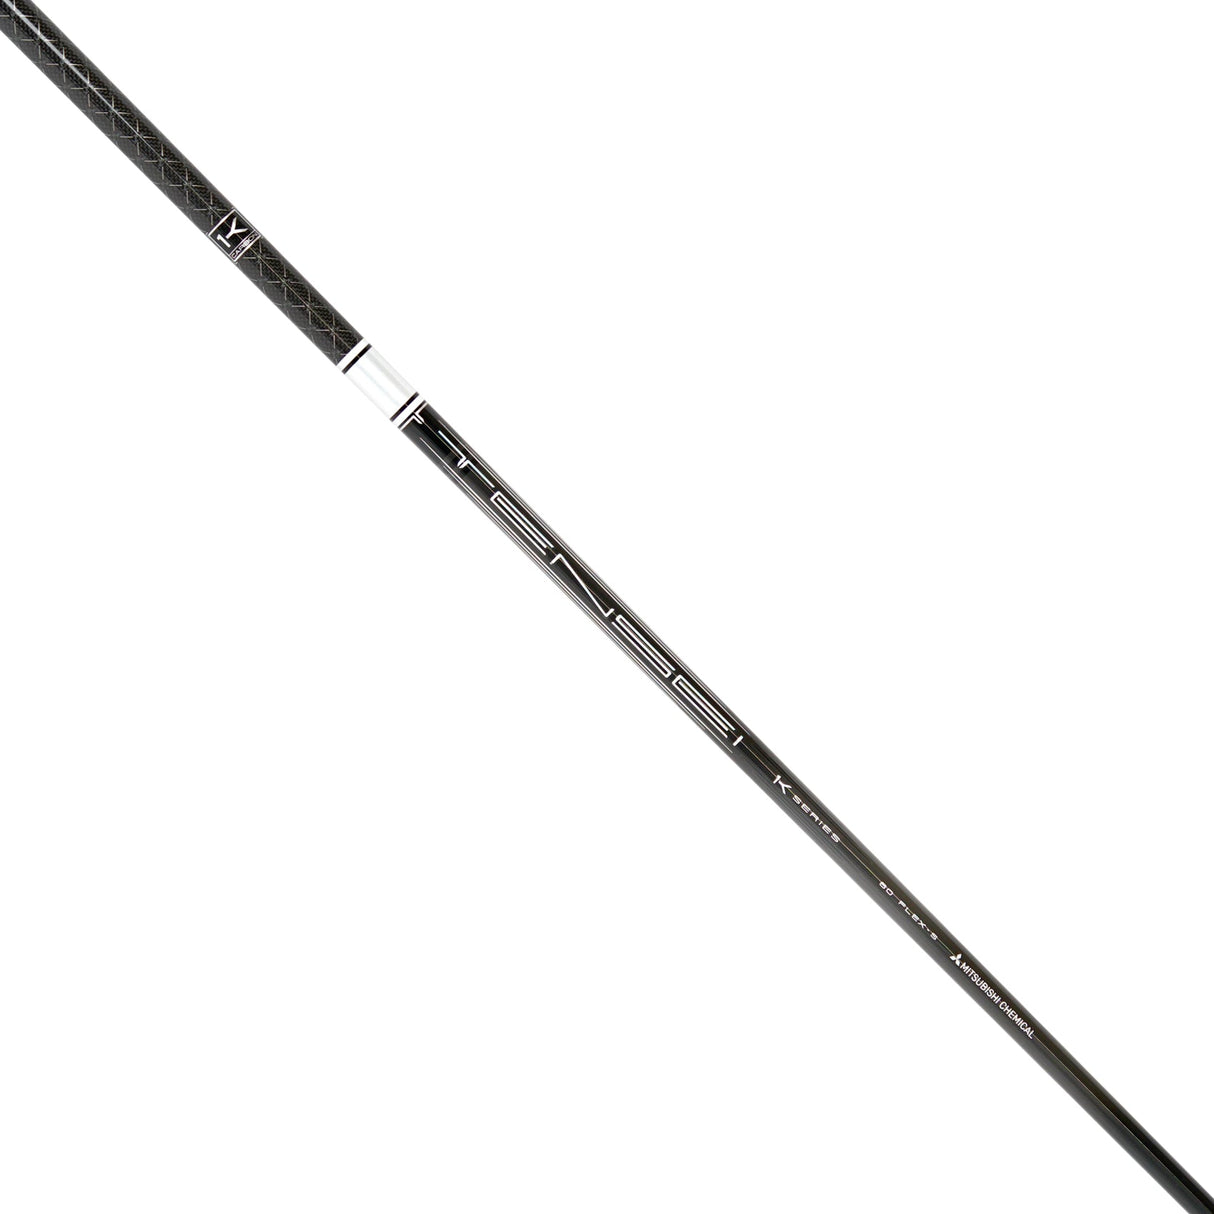 ASSEMBLED) Mitsubishi Tensei Pro White 1K Graphite Shaft with Adapter –  Grips4Less